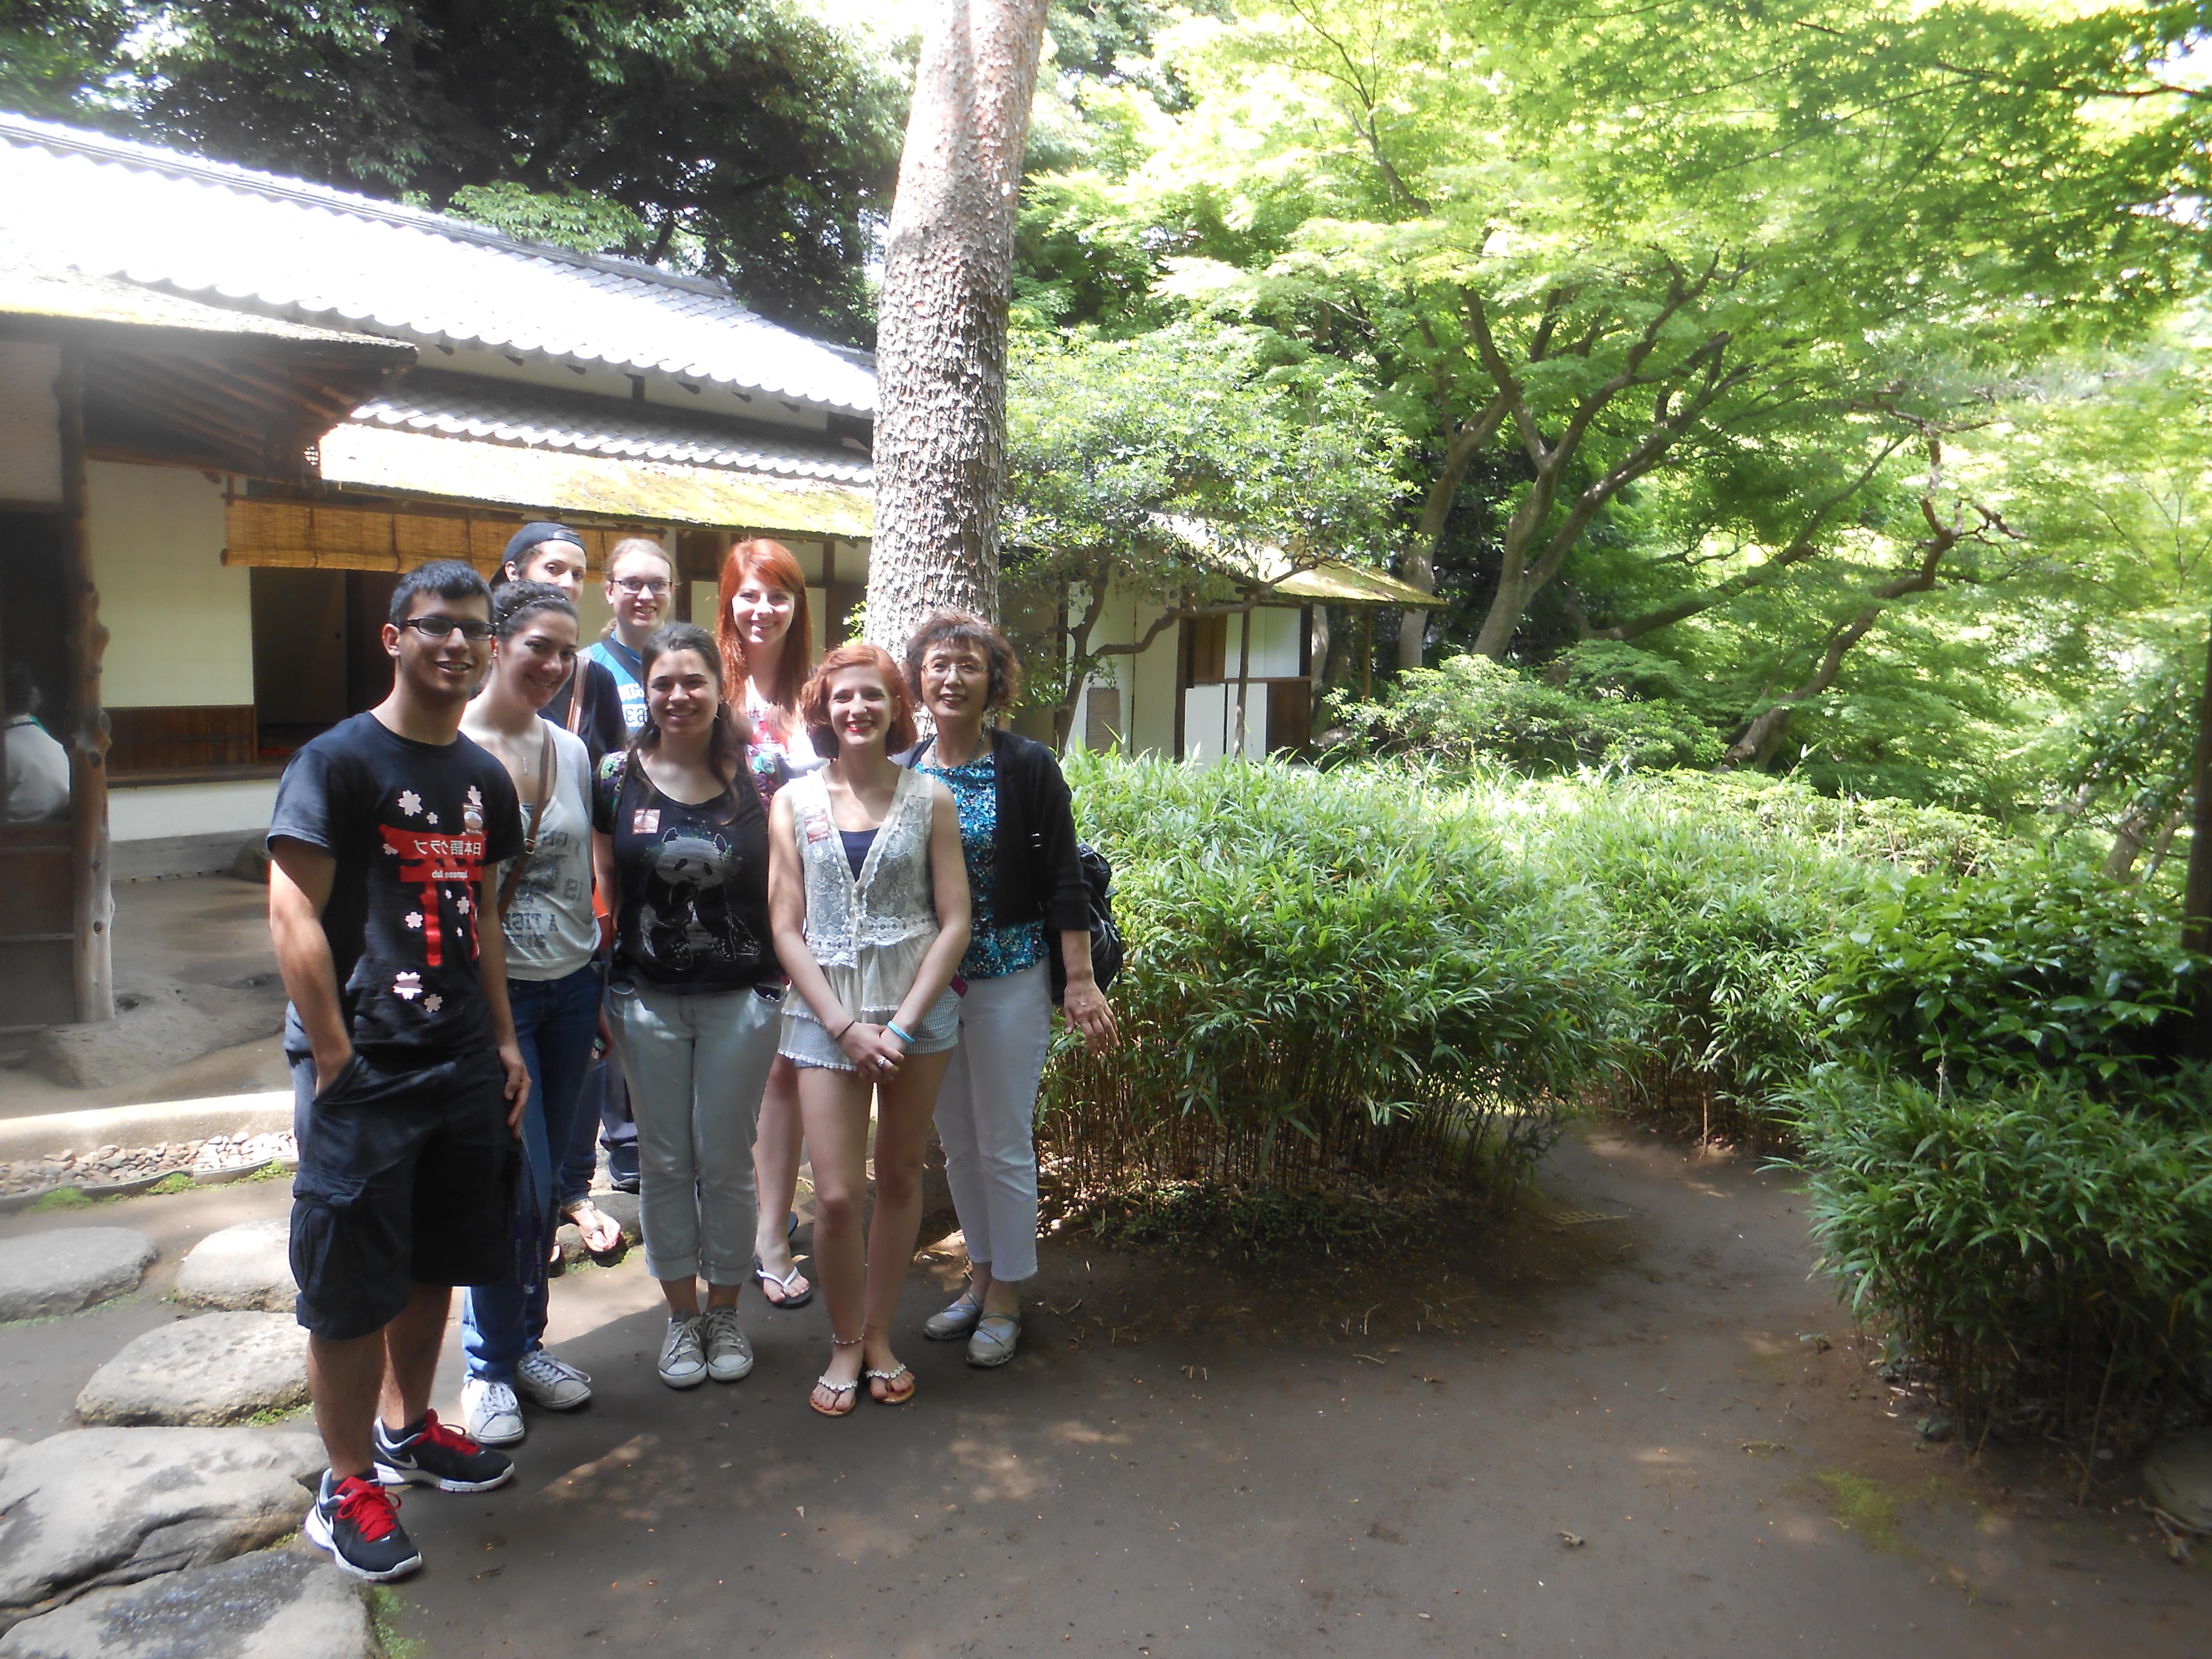 Japanese professor and students in front of teahouse in Japan